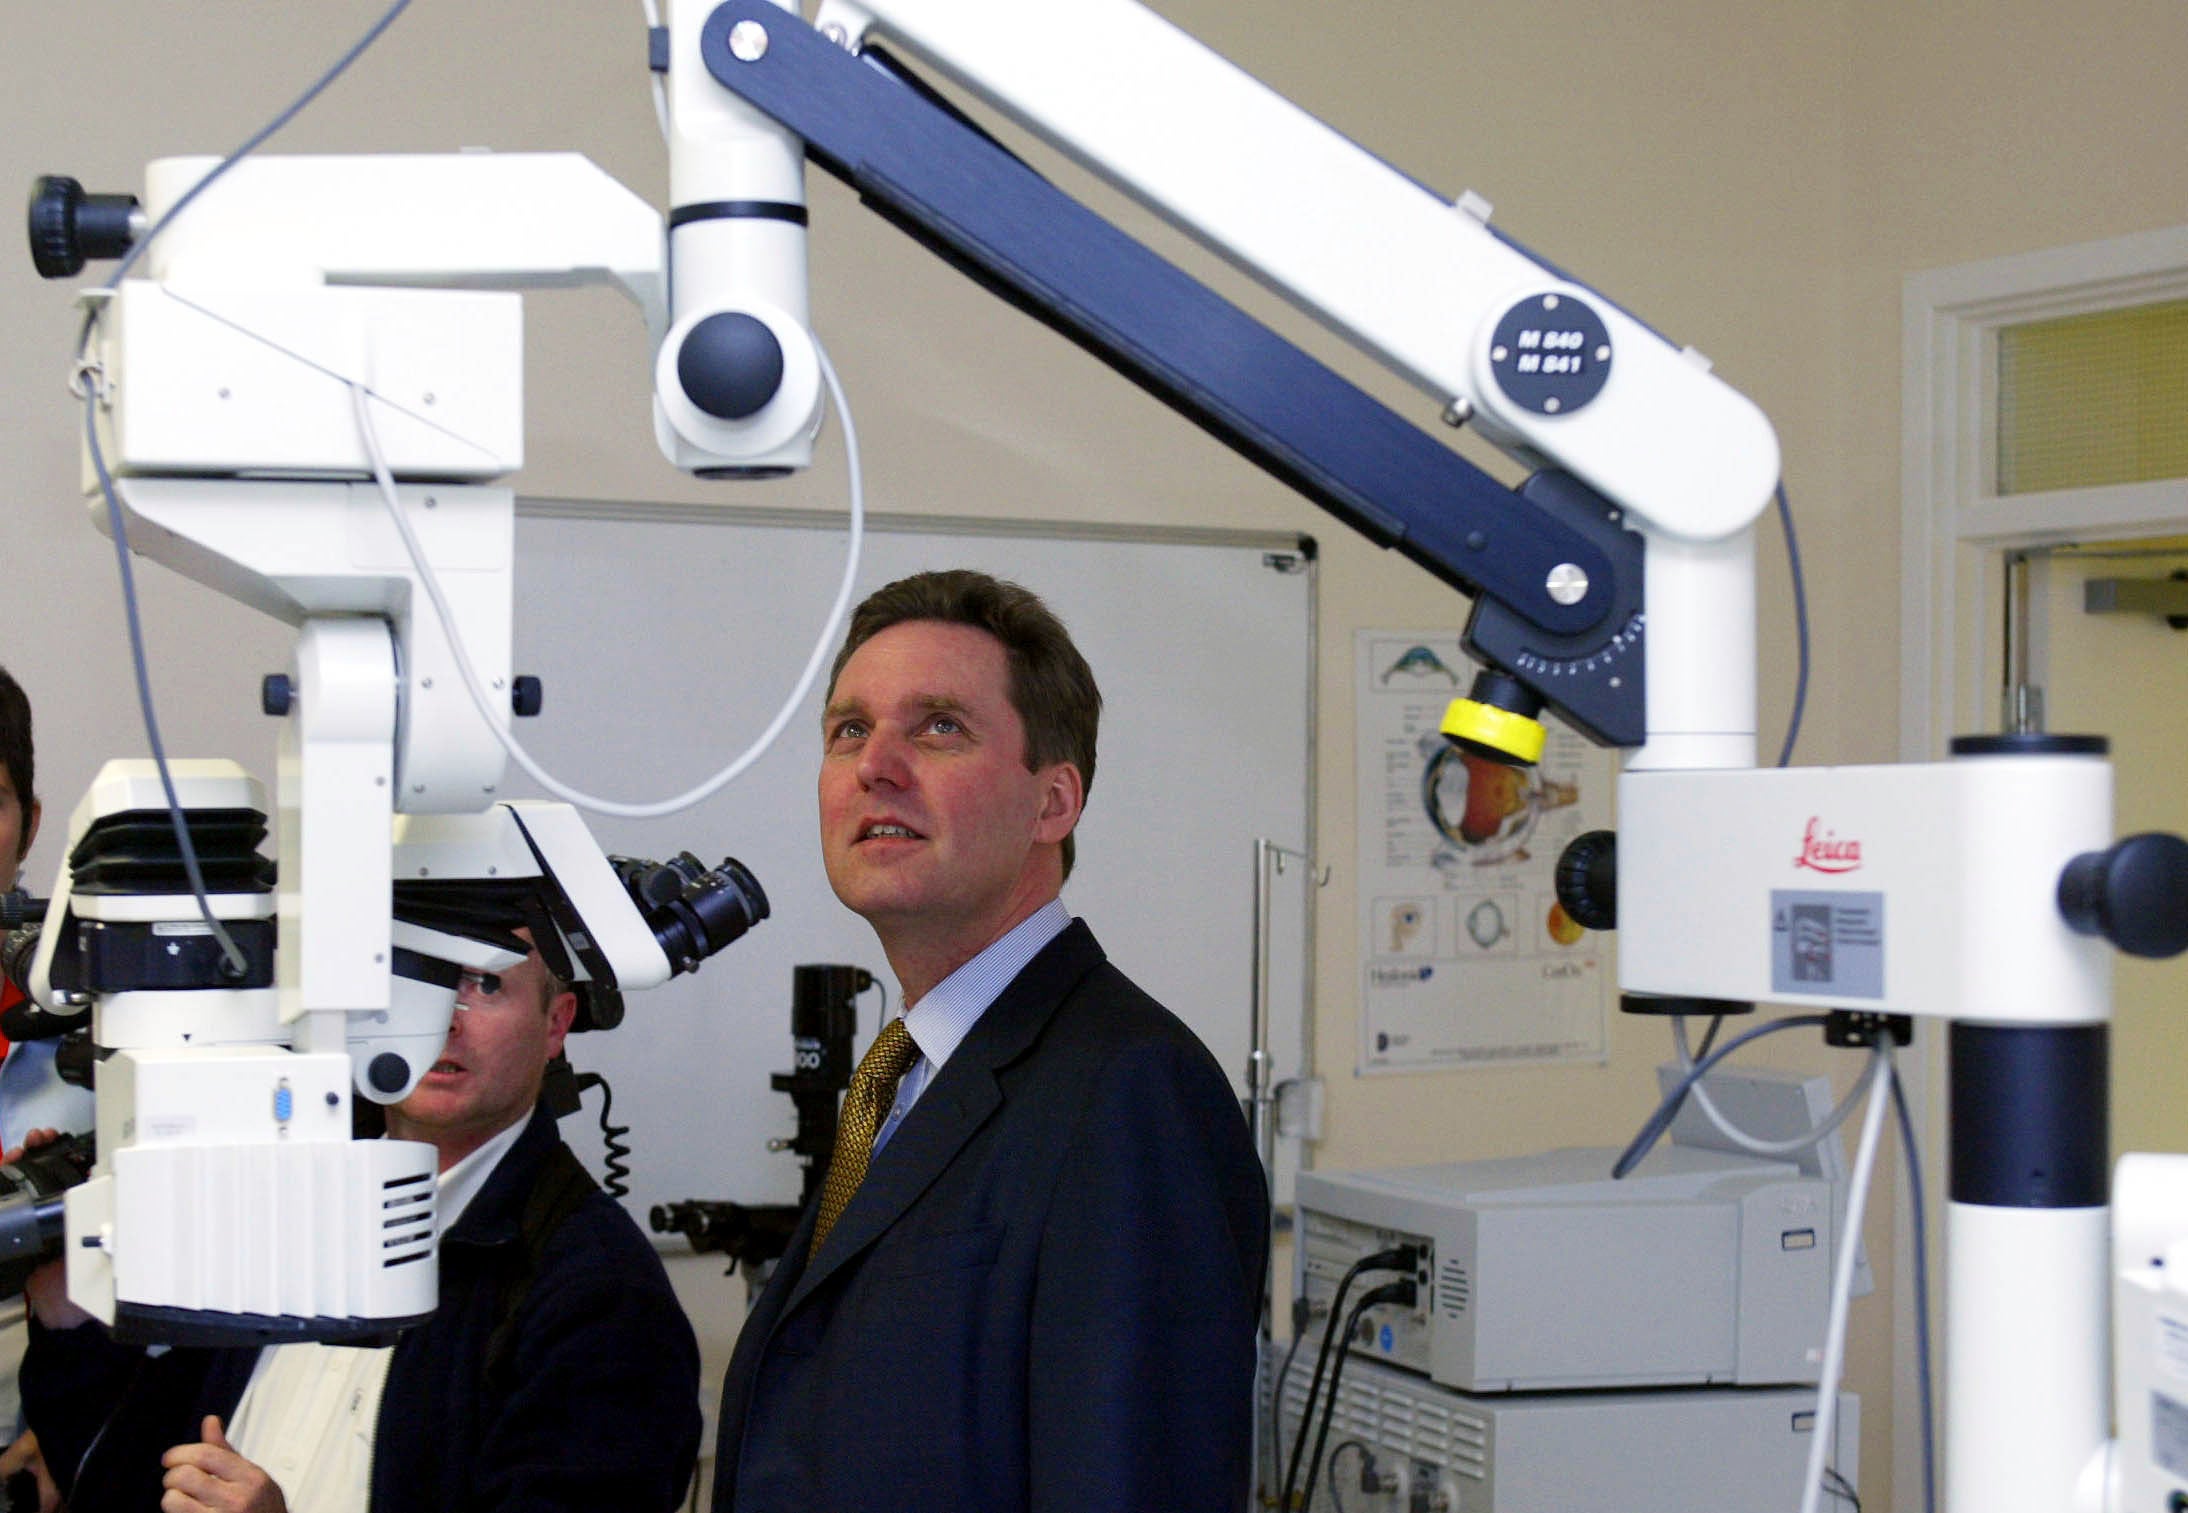 Health secretary Alan Milburn looks at equipment during his visit to the ophthalmology department at Peterborough District Hospital in 2002